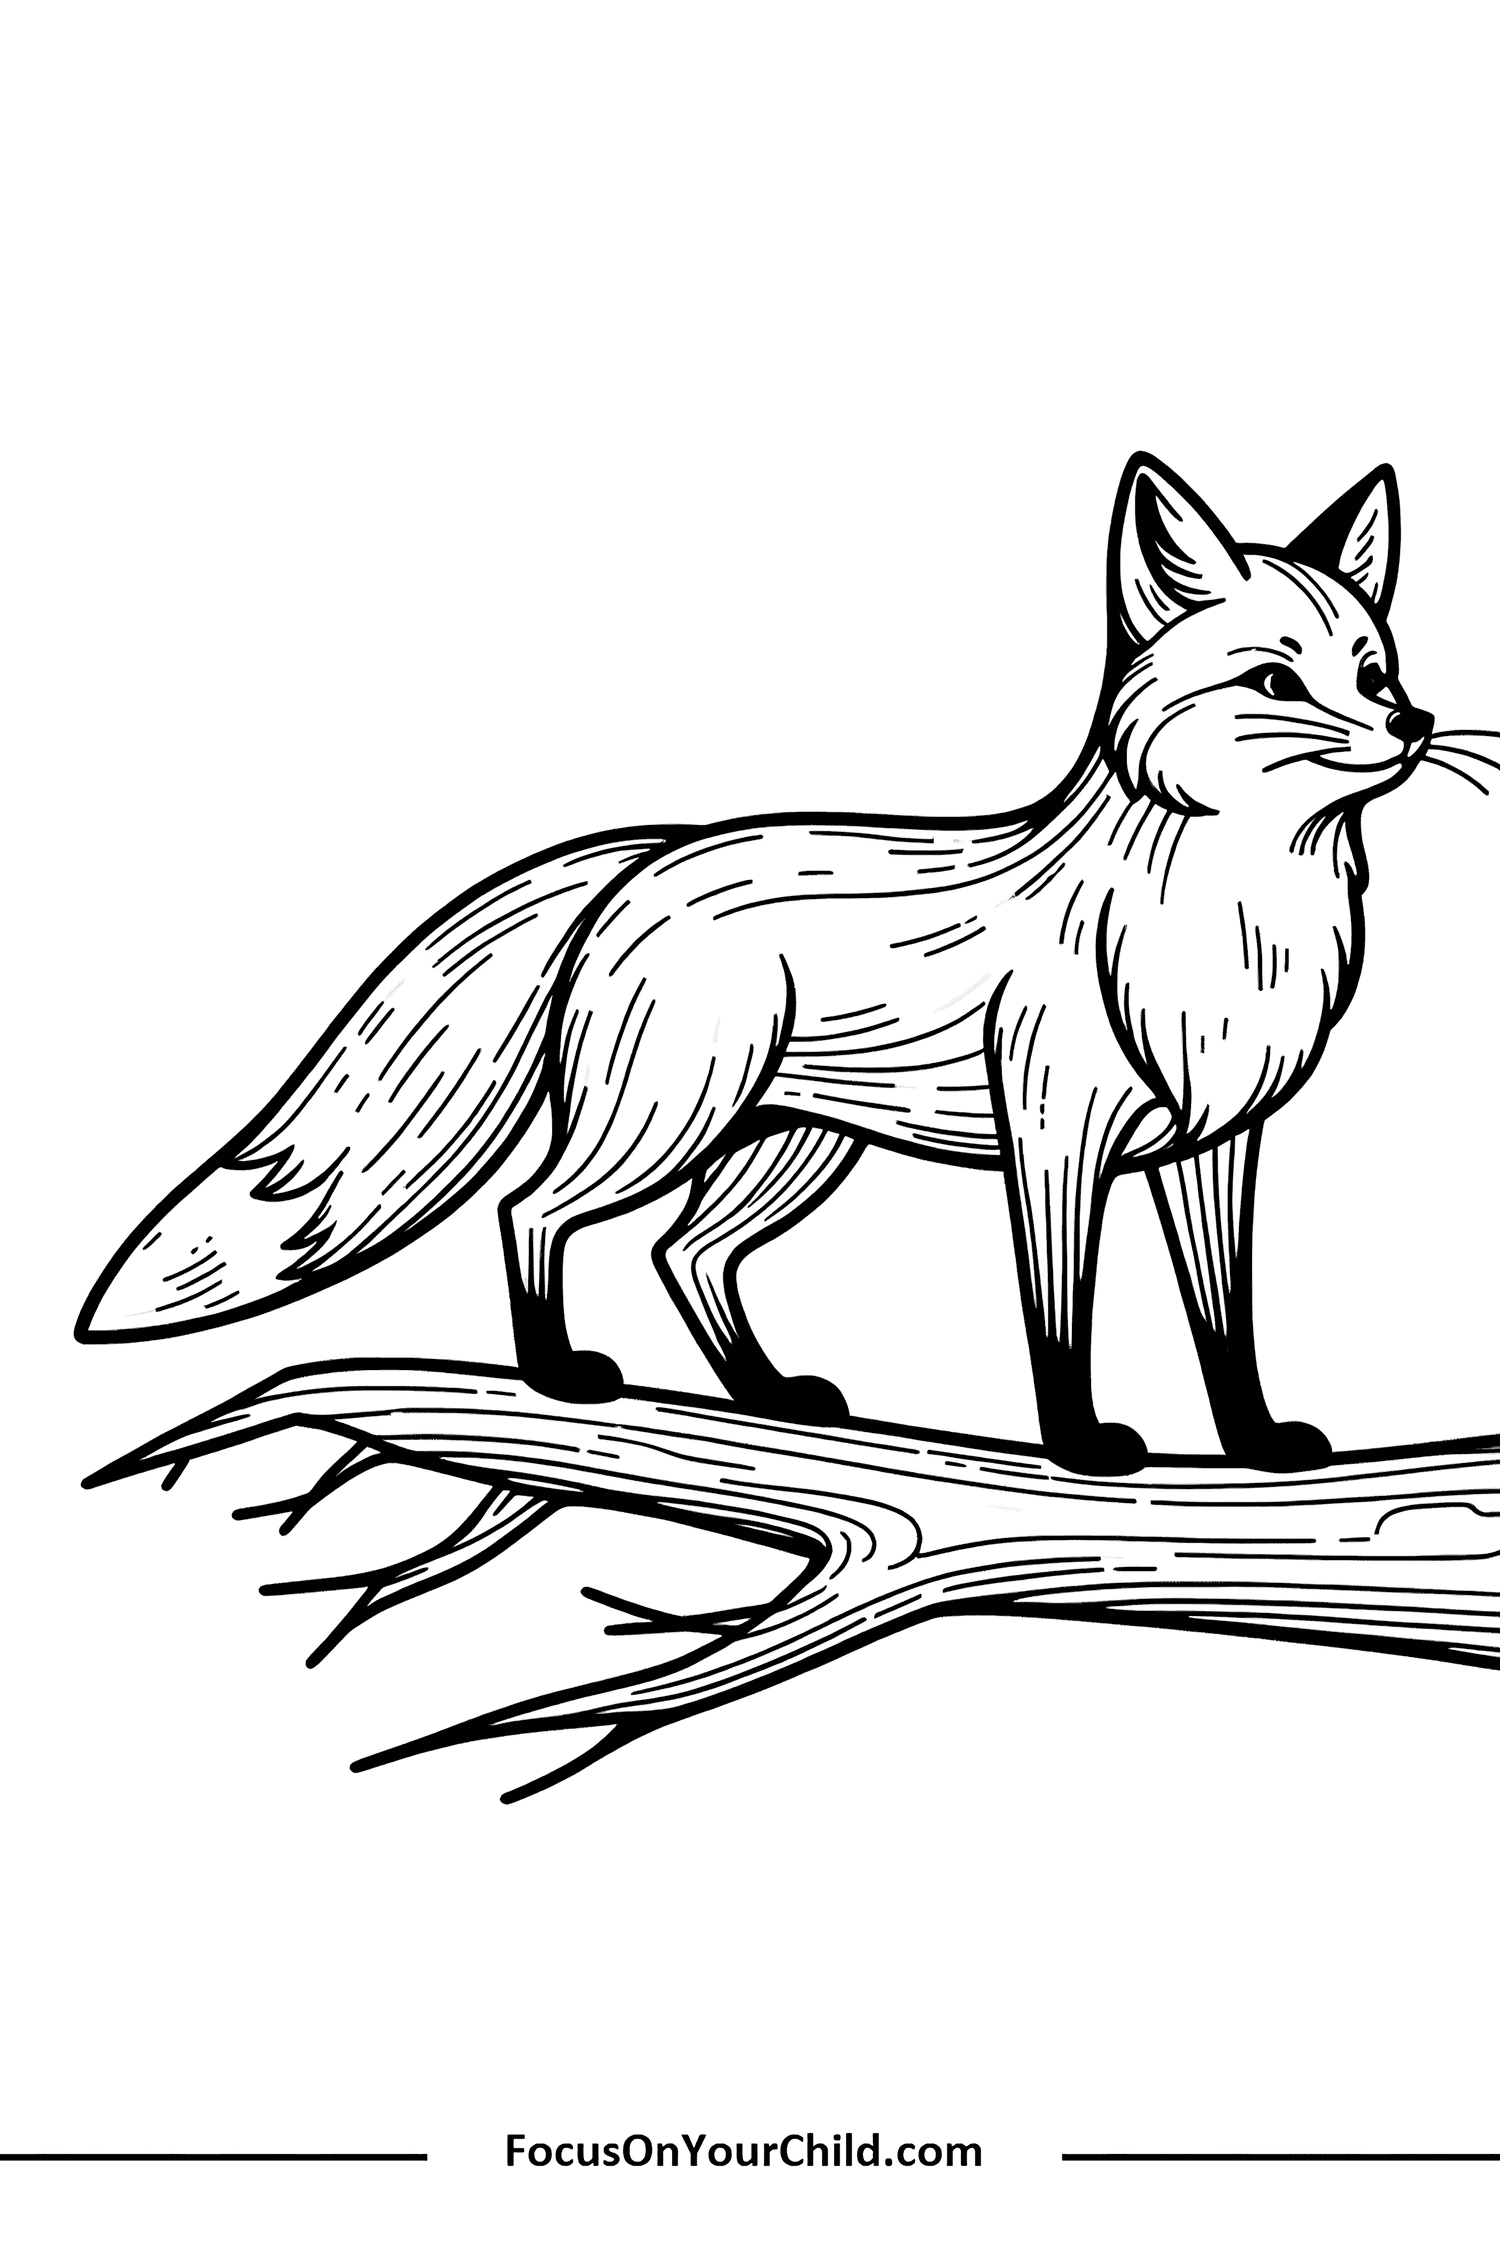 Detailed line drawing of a fox standing on a tree branch in black and white.